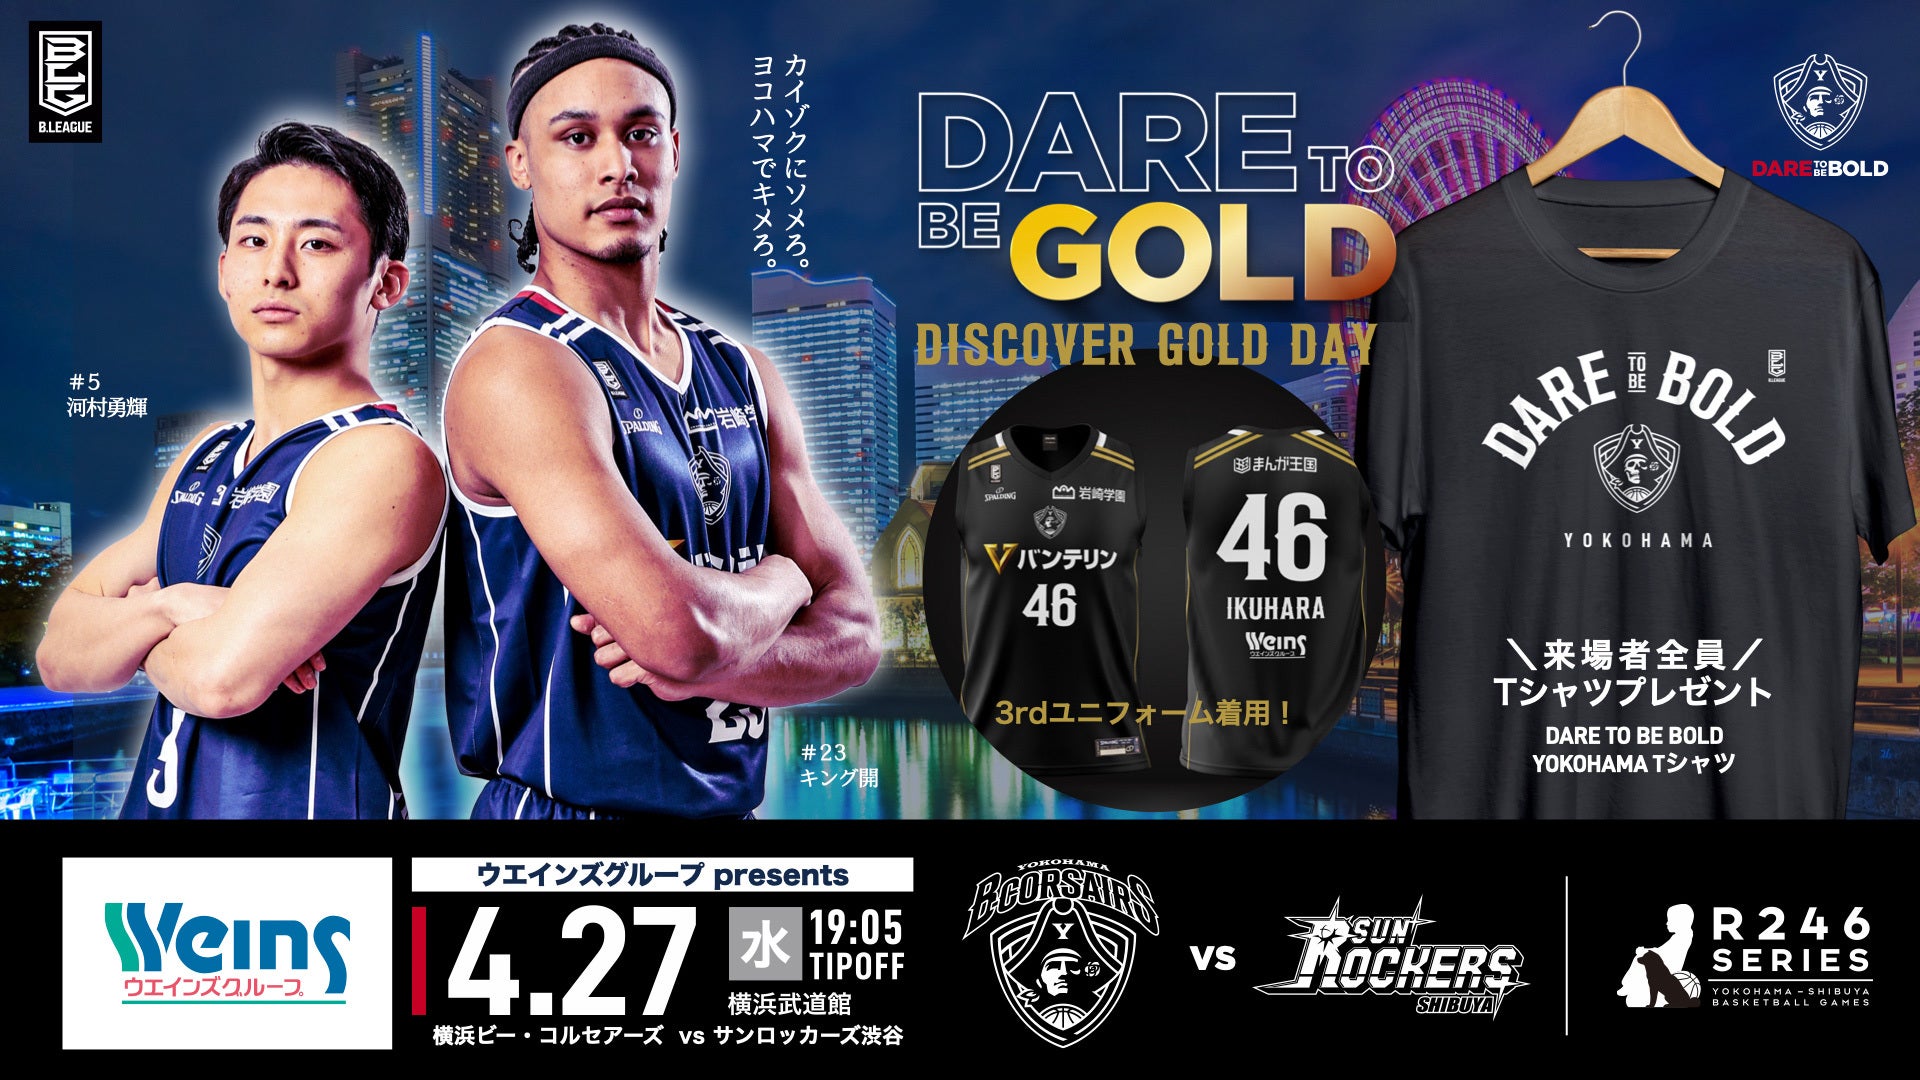 DISCOVER GOLD DAY 3rdユニフォームパートナー